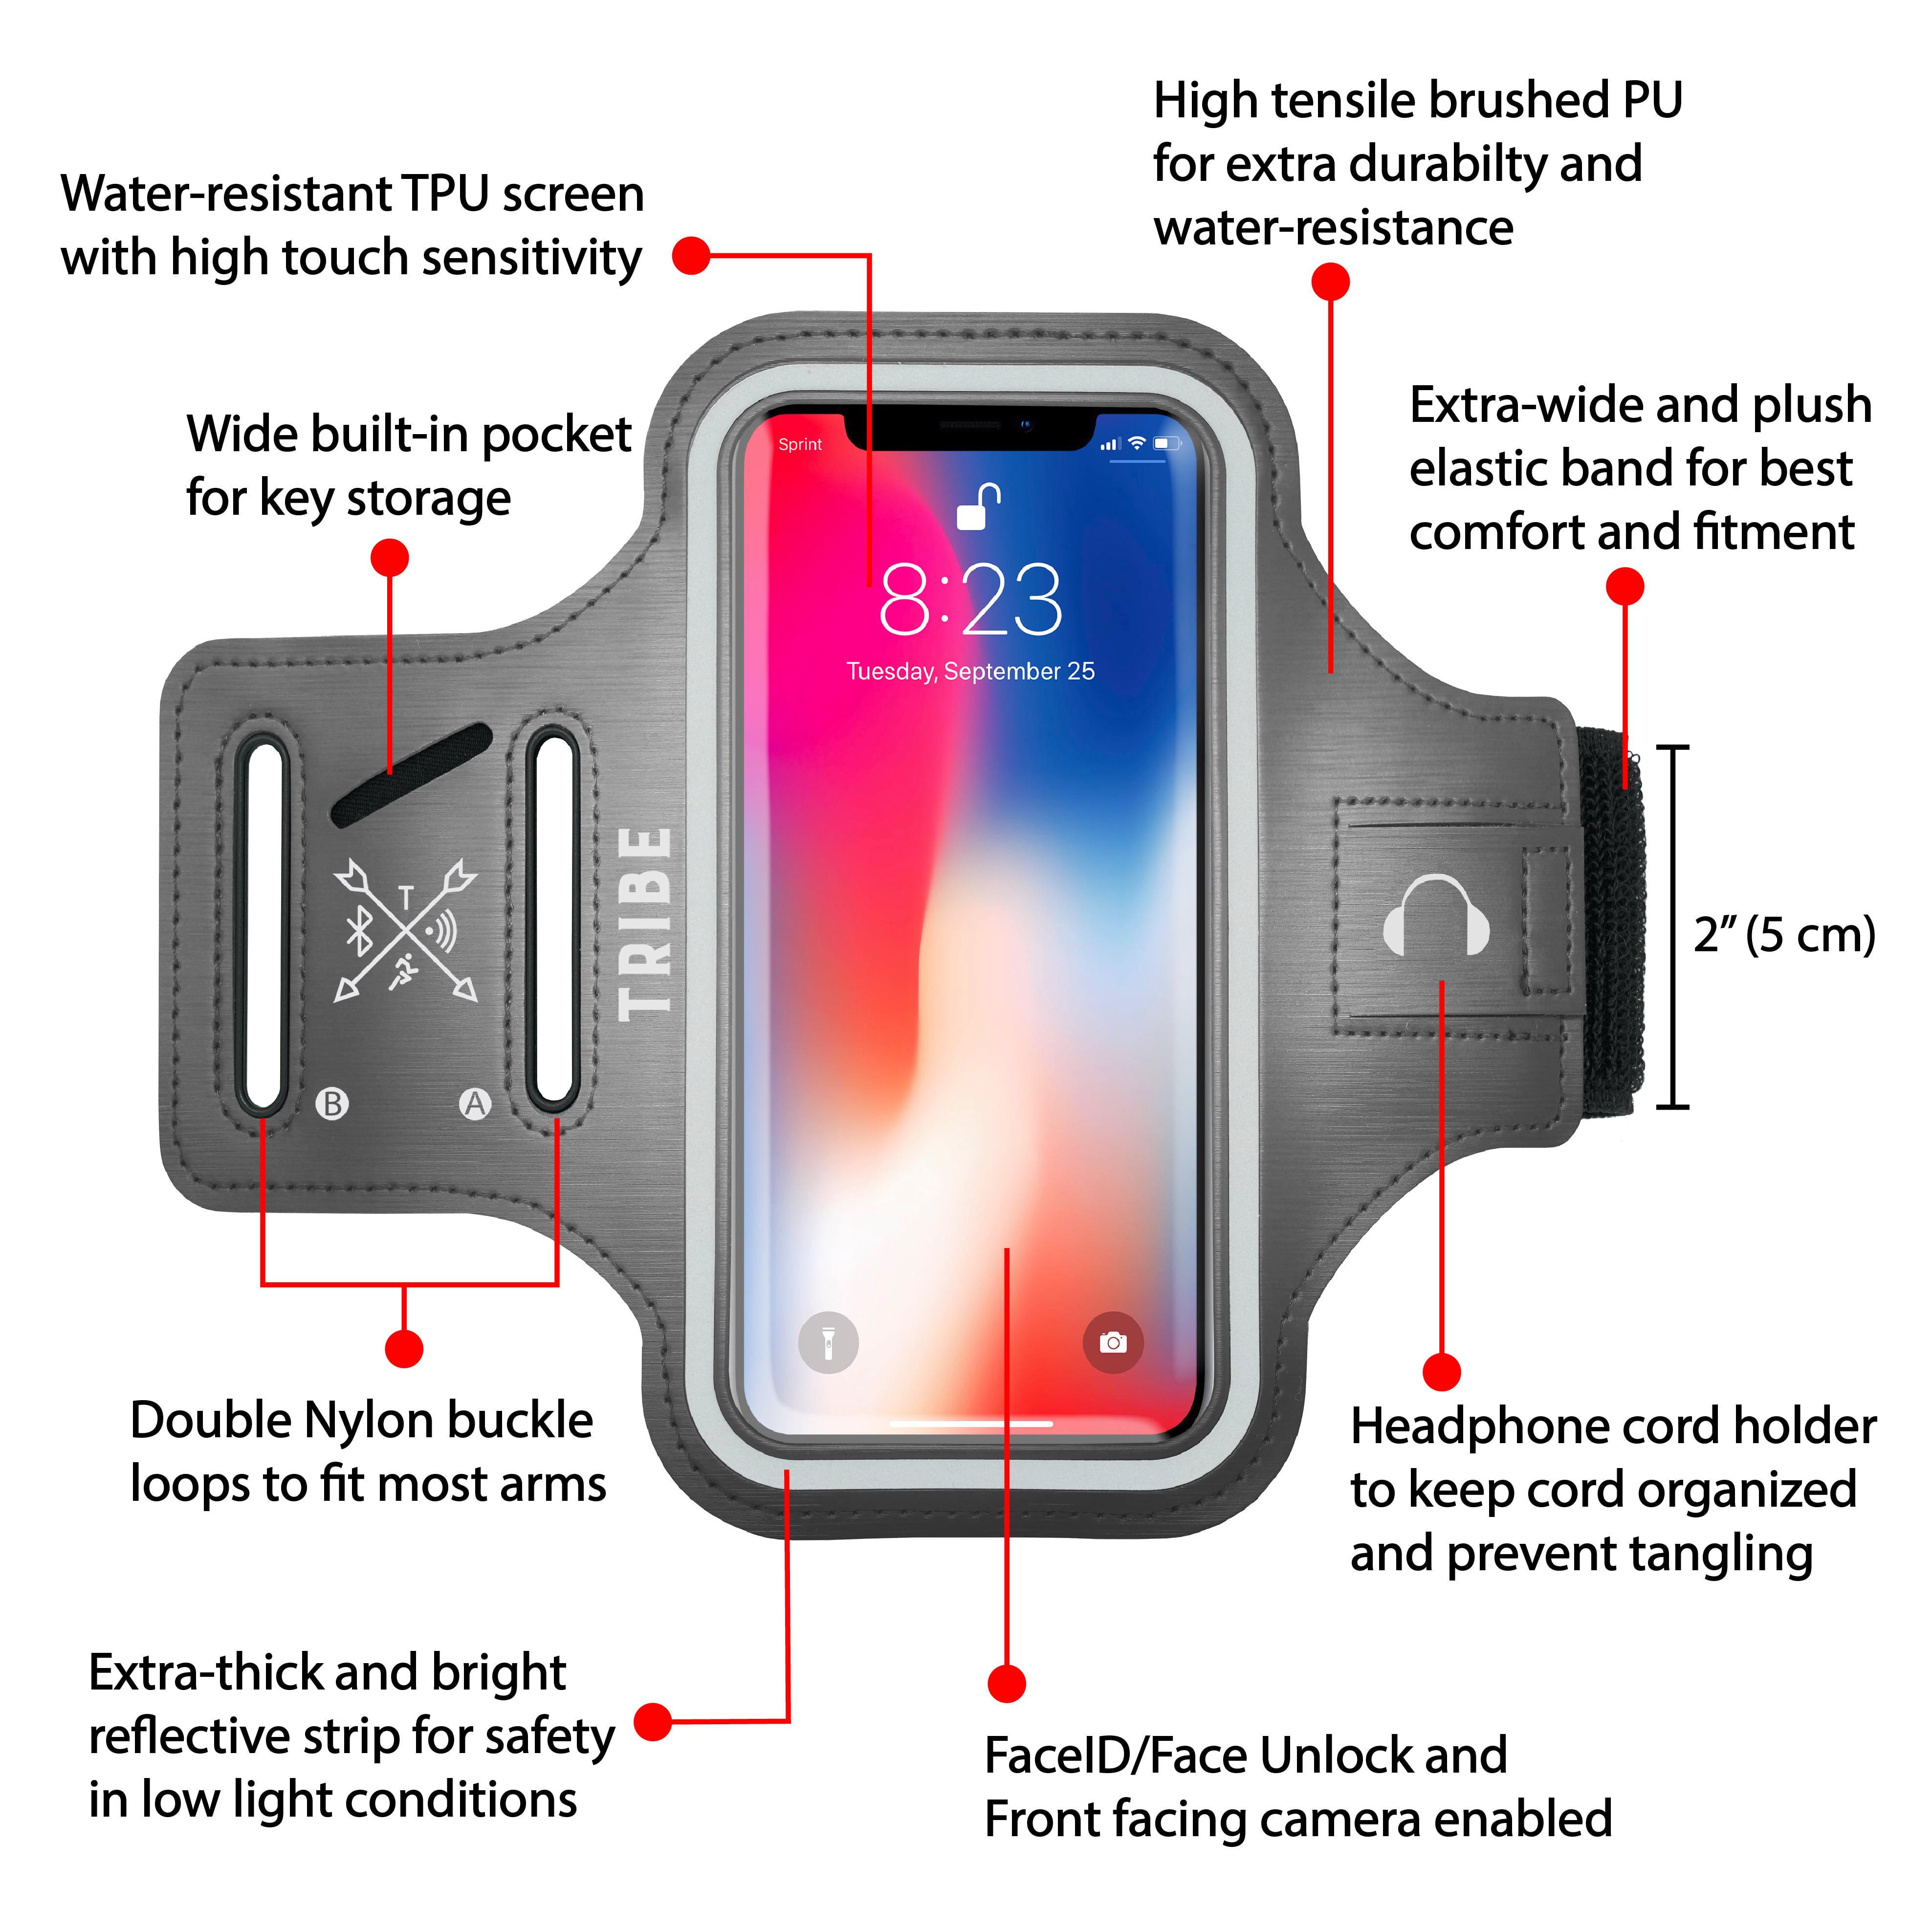 6S Plus XR S8 Plus Note 4/5/8/9 with Adjustable Elastic Band & Key Holder A8 Plus 8 Plus TRIBE Water Resistant Cell Phone Armband Case for iPhone Xs Max 7 Plus 6 Plus Samsung Galaxy S9 Plus 